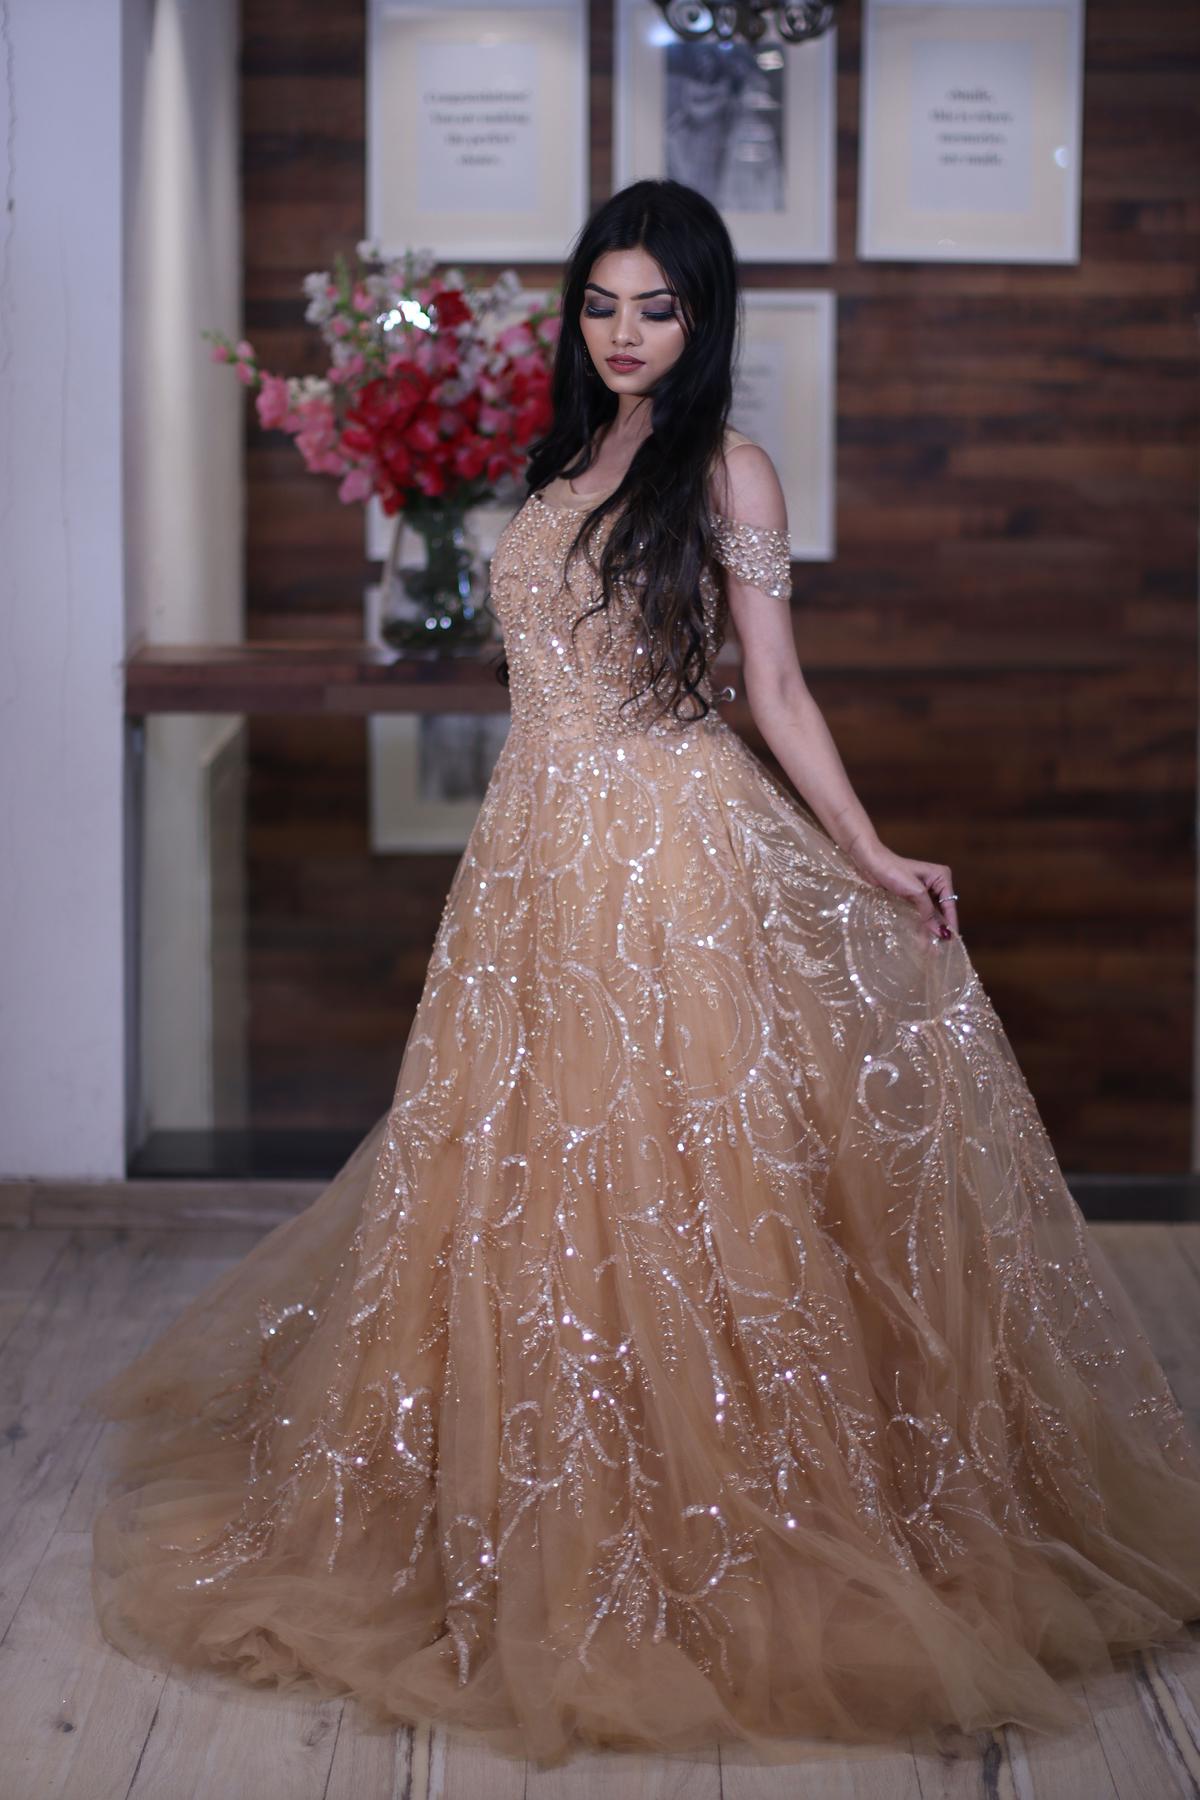 Sizzle and shine in this glorious golden gown Buy Gown online   httpwwwaishwaryadesignstudioco  Anarkali dress pattern Designer  gowns Casual dress outfits